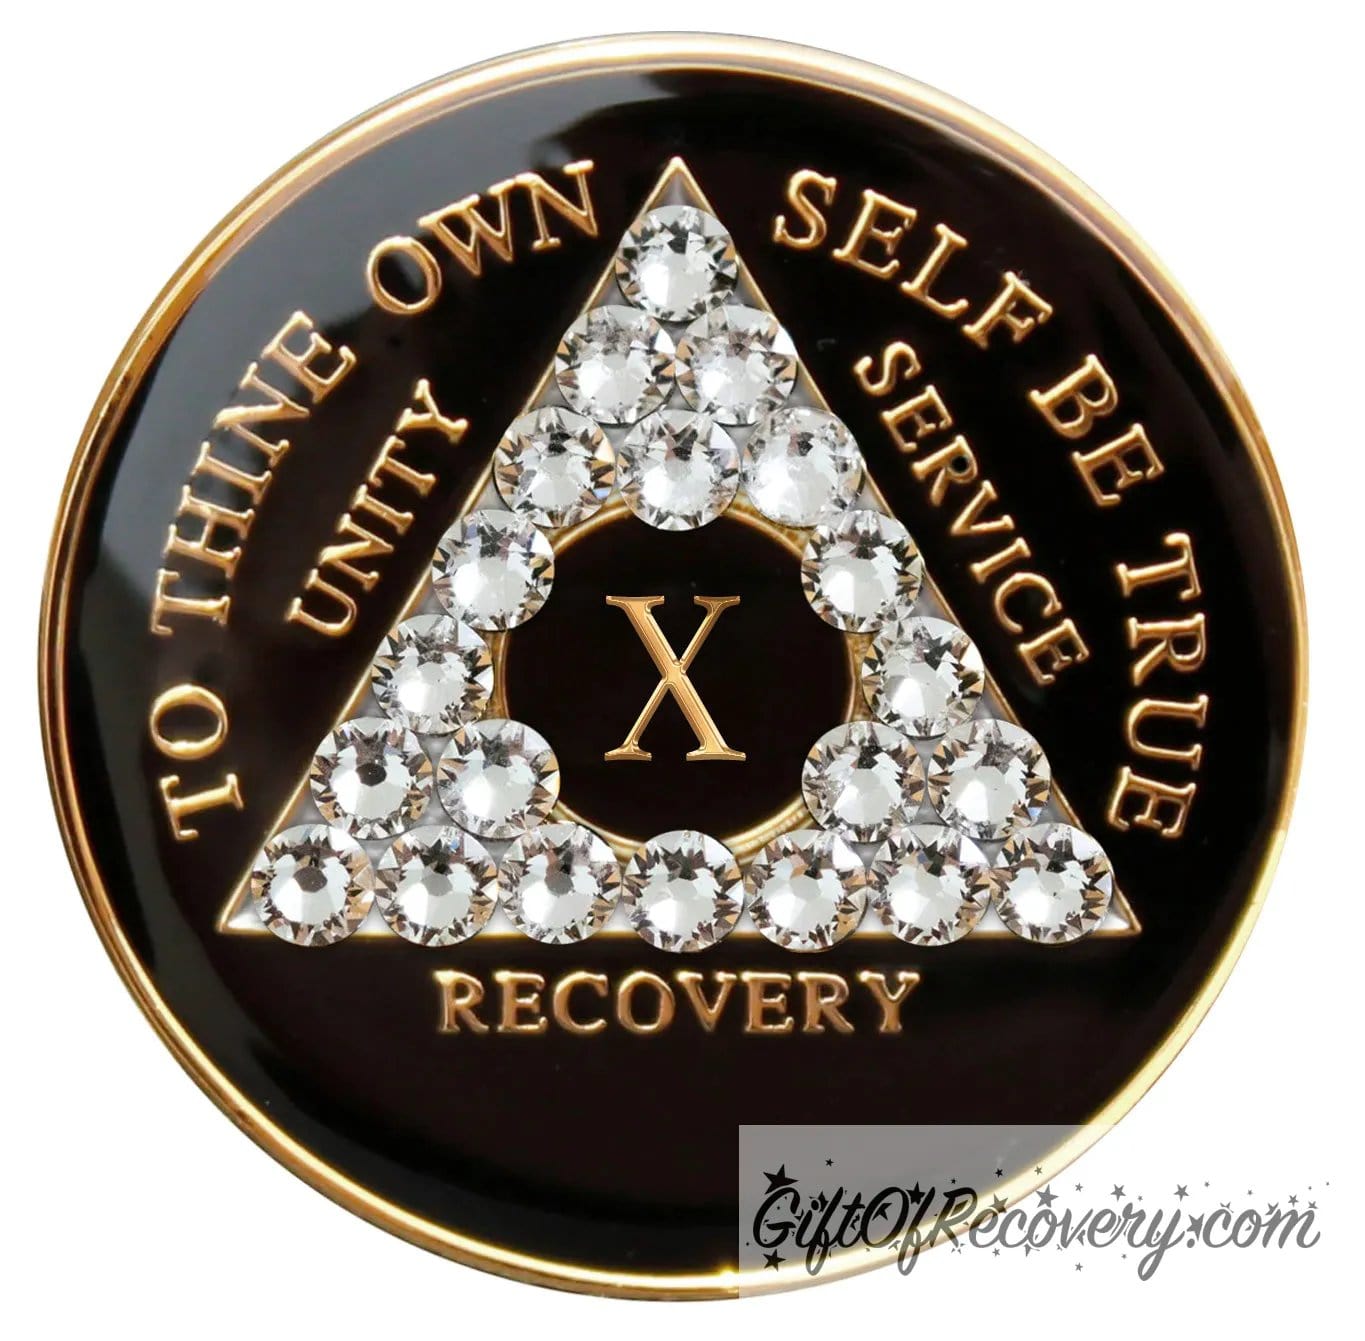 10 year AA medallion black onyx with 21 clear genuine crystals in the shape of the triangle, to thine own self be true, unity, service, recovery, and the roman numeral are embossed with 14k gold-plated brass, the recovery medallion is sealed with resin for a glossy finish that will last and is scratch proof.